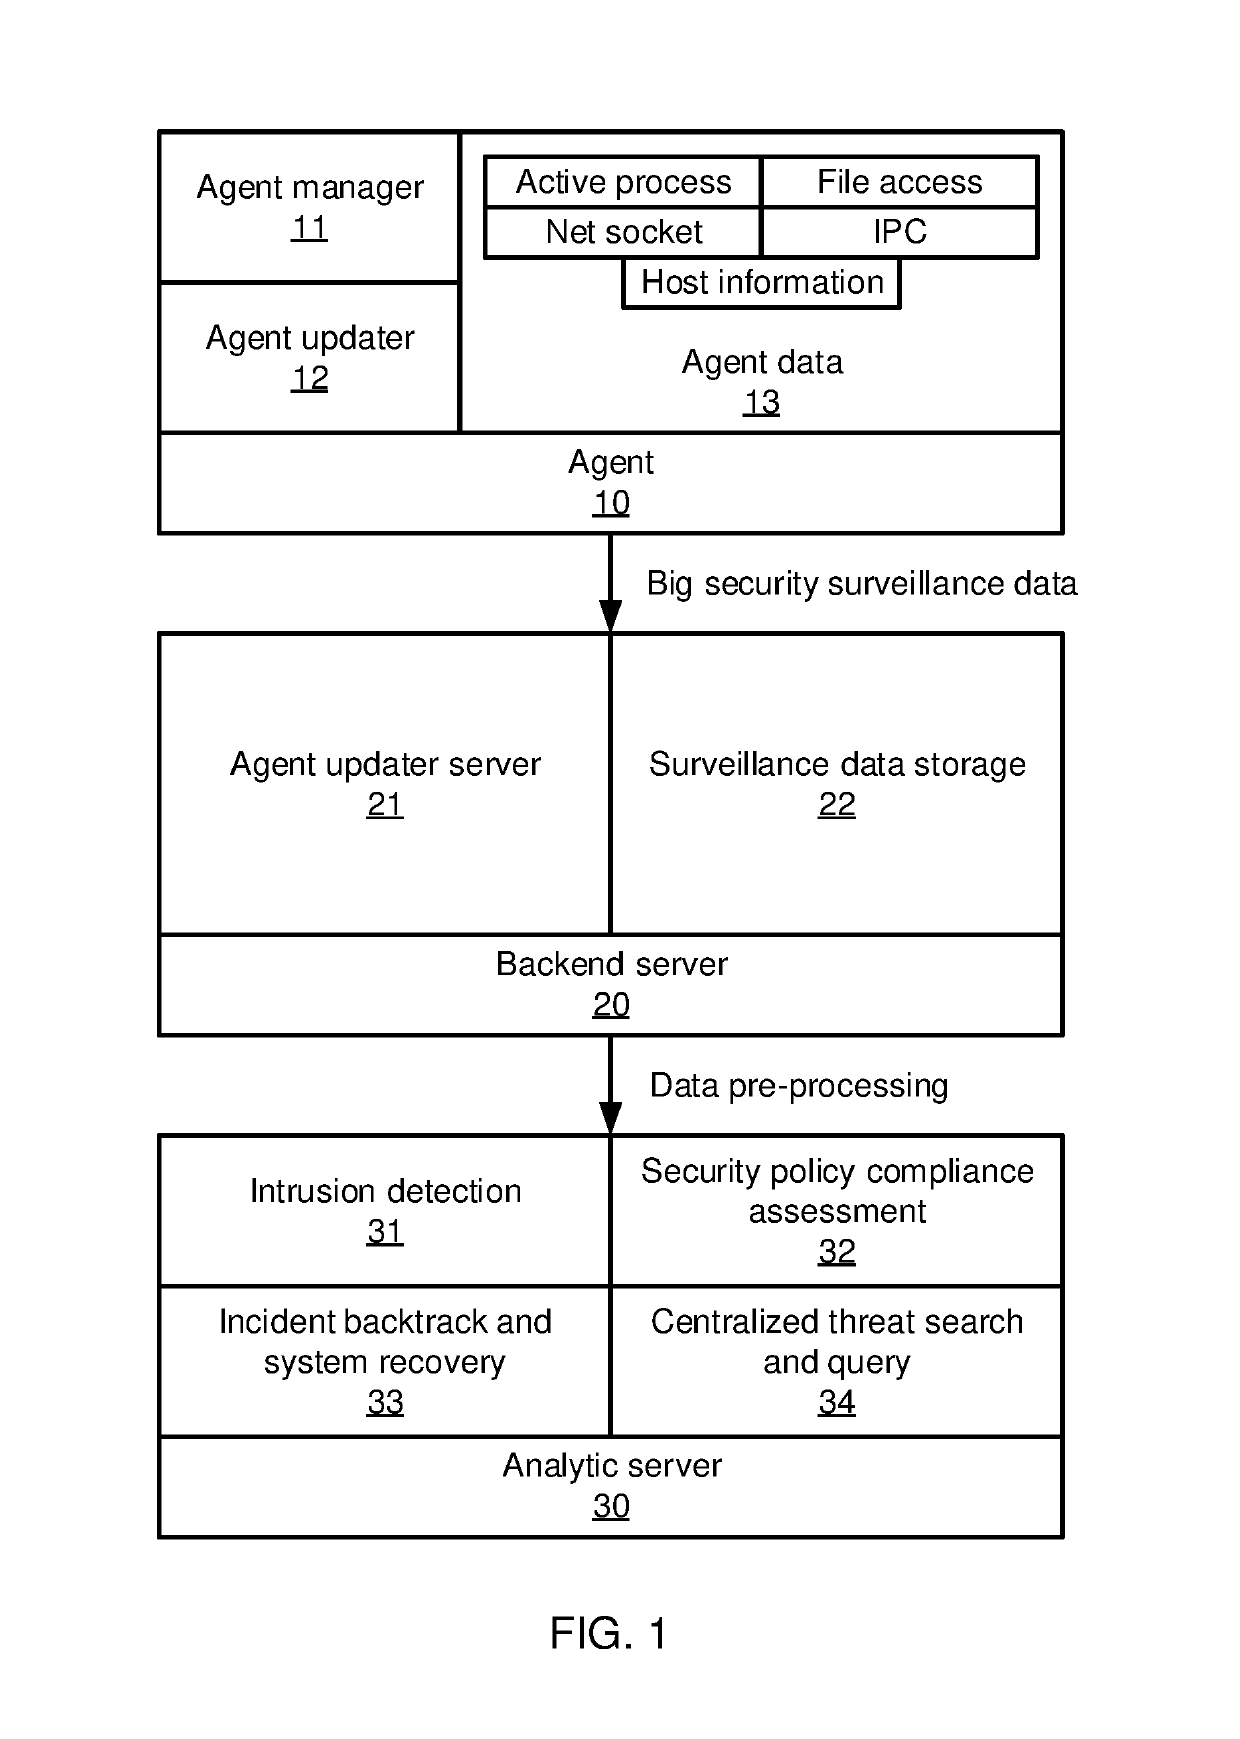 Constructing graph models of event correlation in enterprise security systems